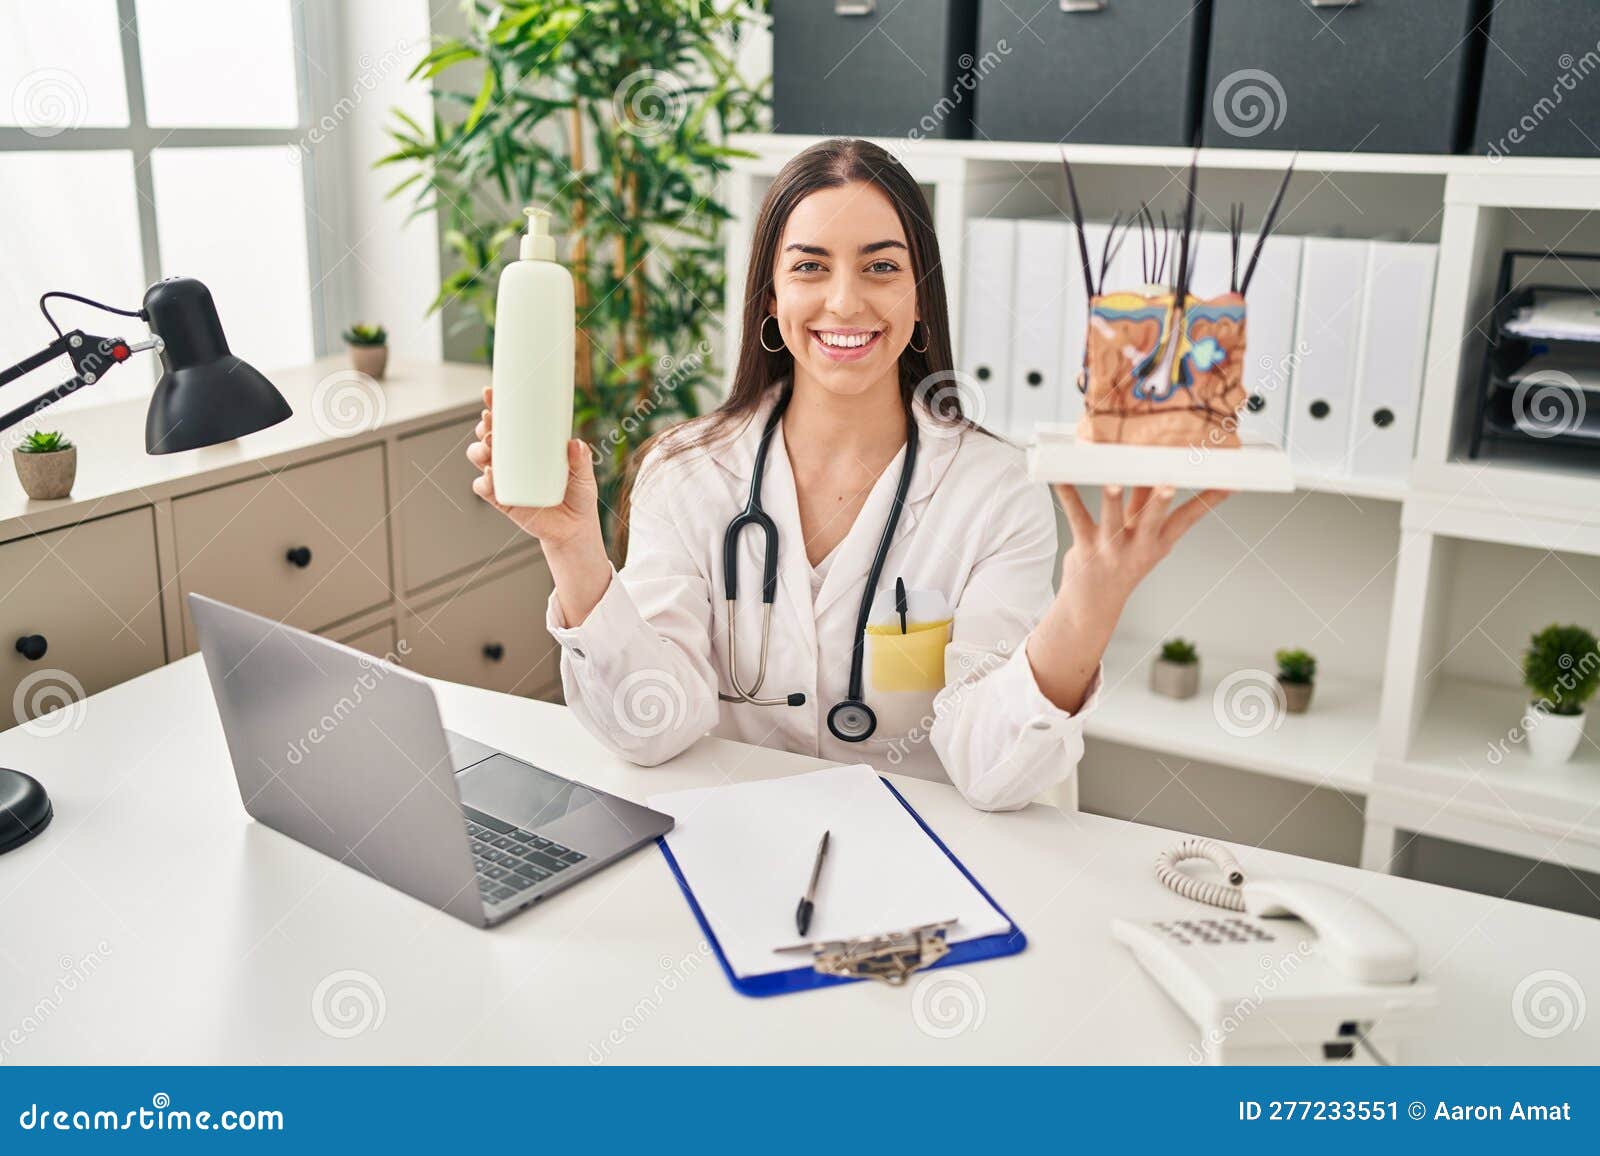 hispanic doctor woman holding model of human anatomical skin and hair smiling with a happy and cool smile on face